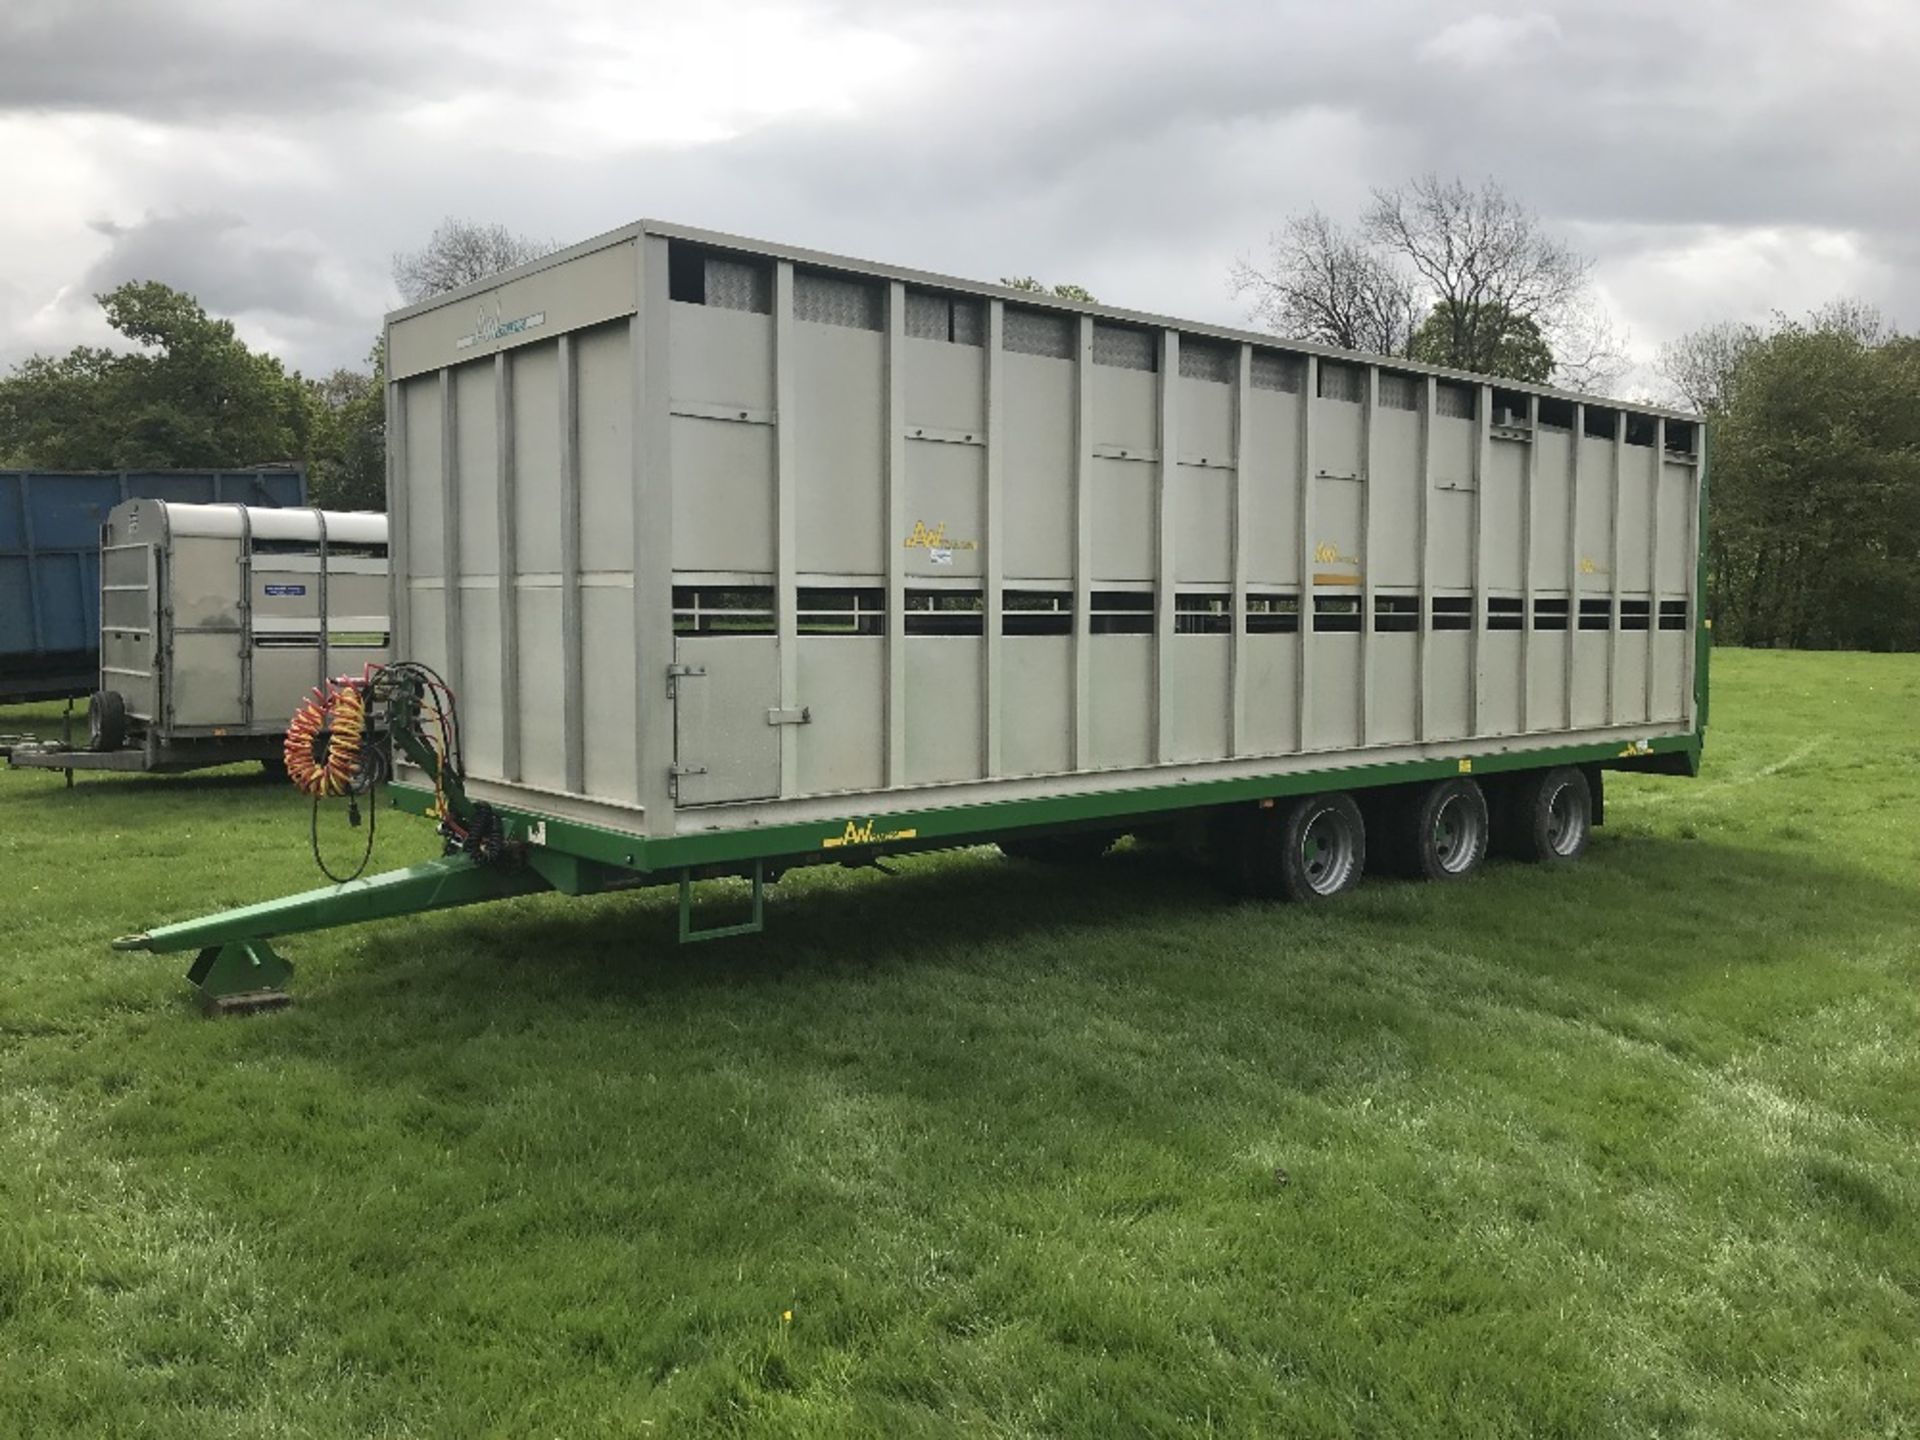 2014 A W Livestock Trailer. 29ft.With Hydraulic Lift Up Decks, Air Brakes, In Excellent Condition